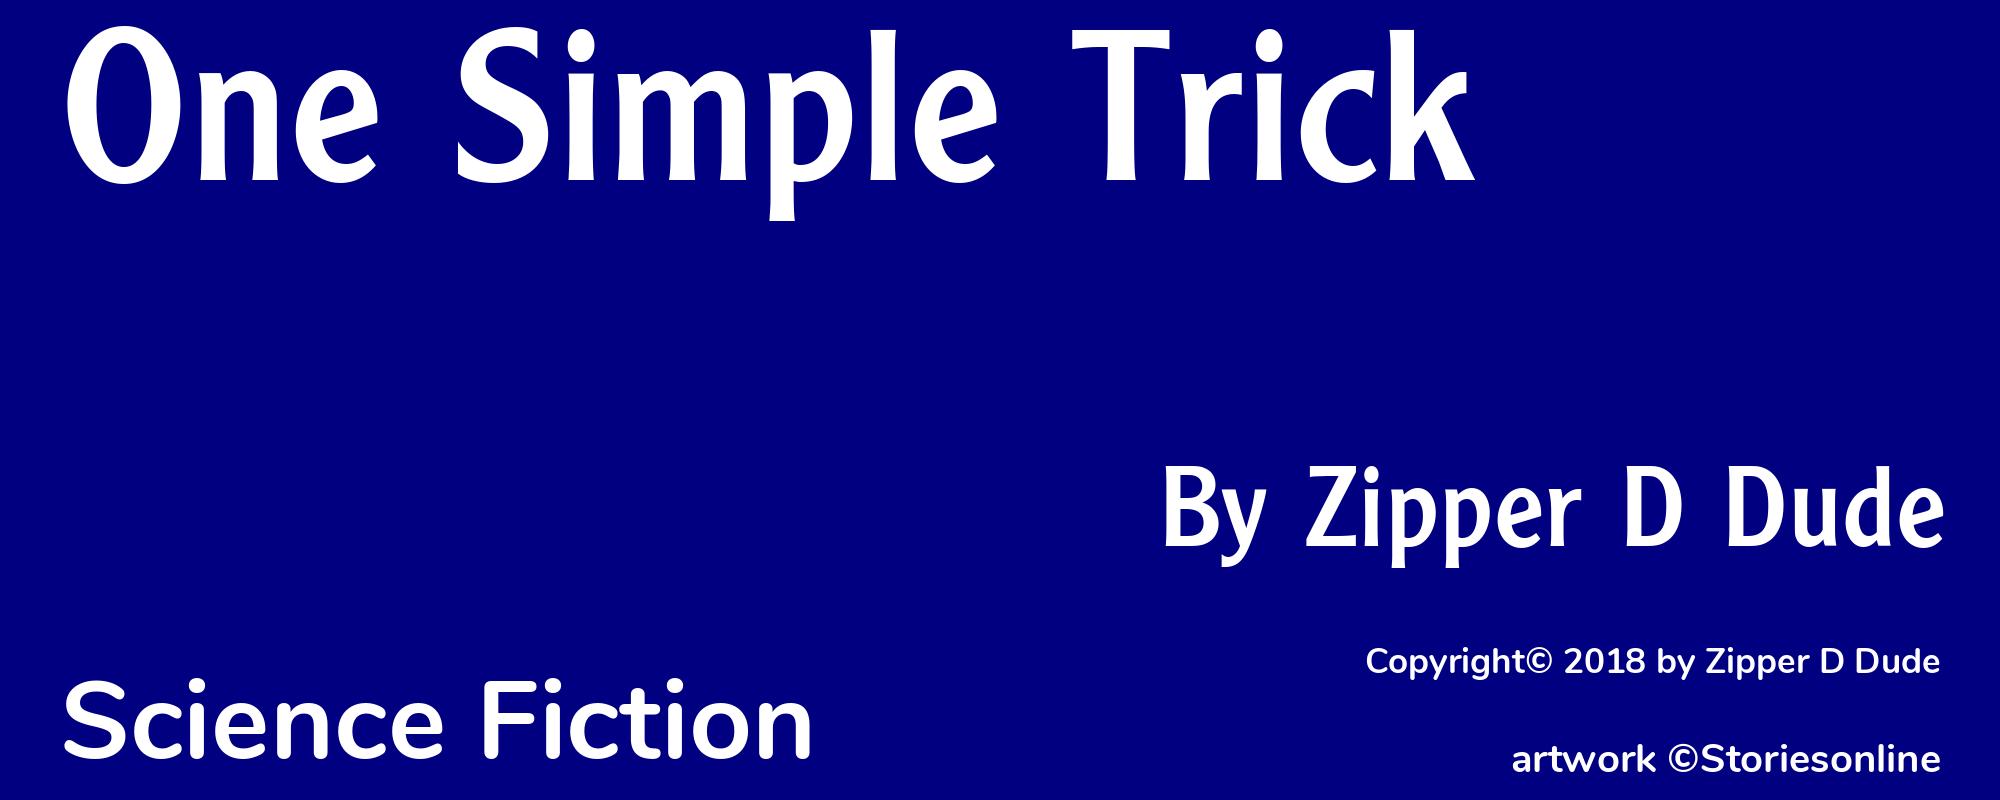 One Simple Trick - Cover